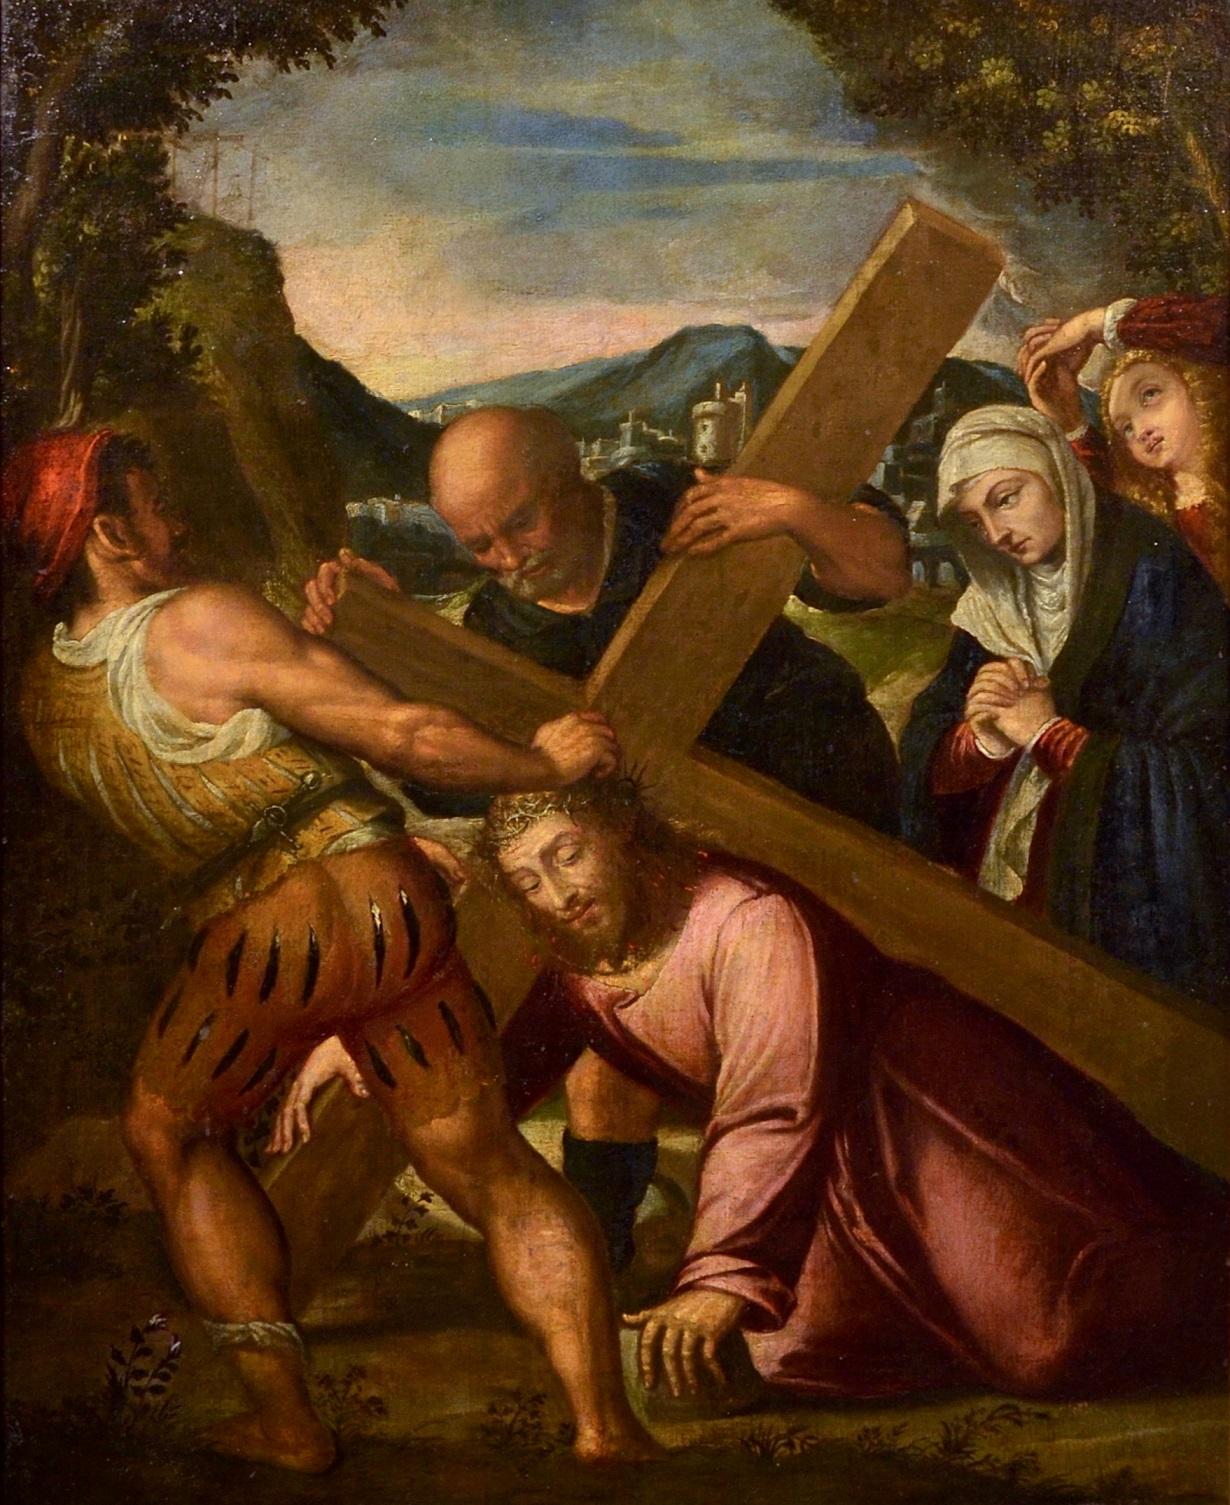 Christ Old master Oil on canvas Paint 17th Century Art Italy Religious Campi  - Painting by Follower of Antonio Campi (Cremona, 1524-1587)